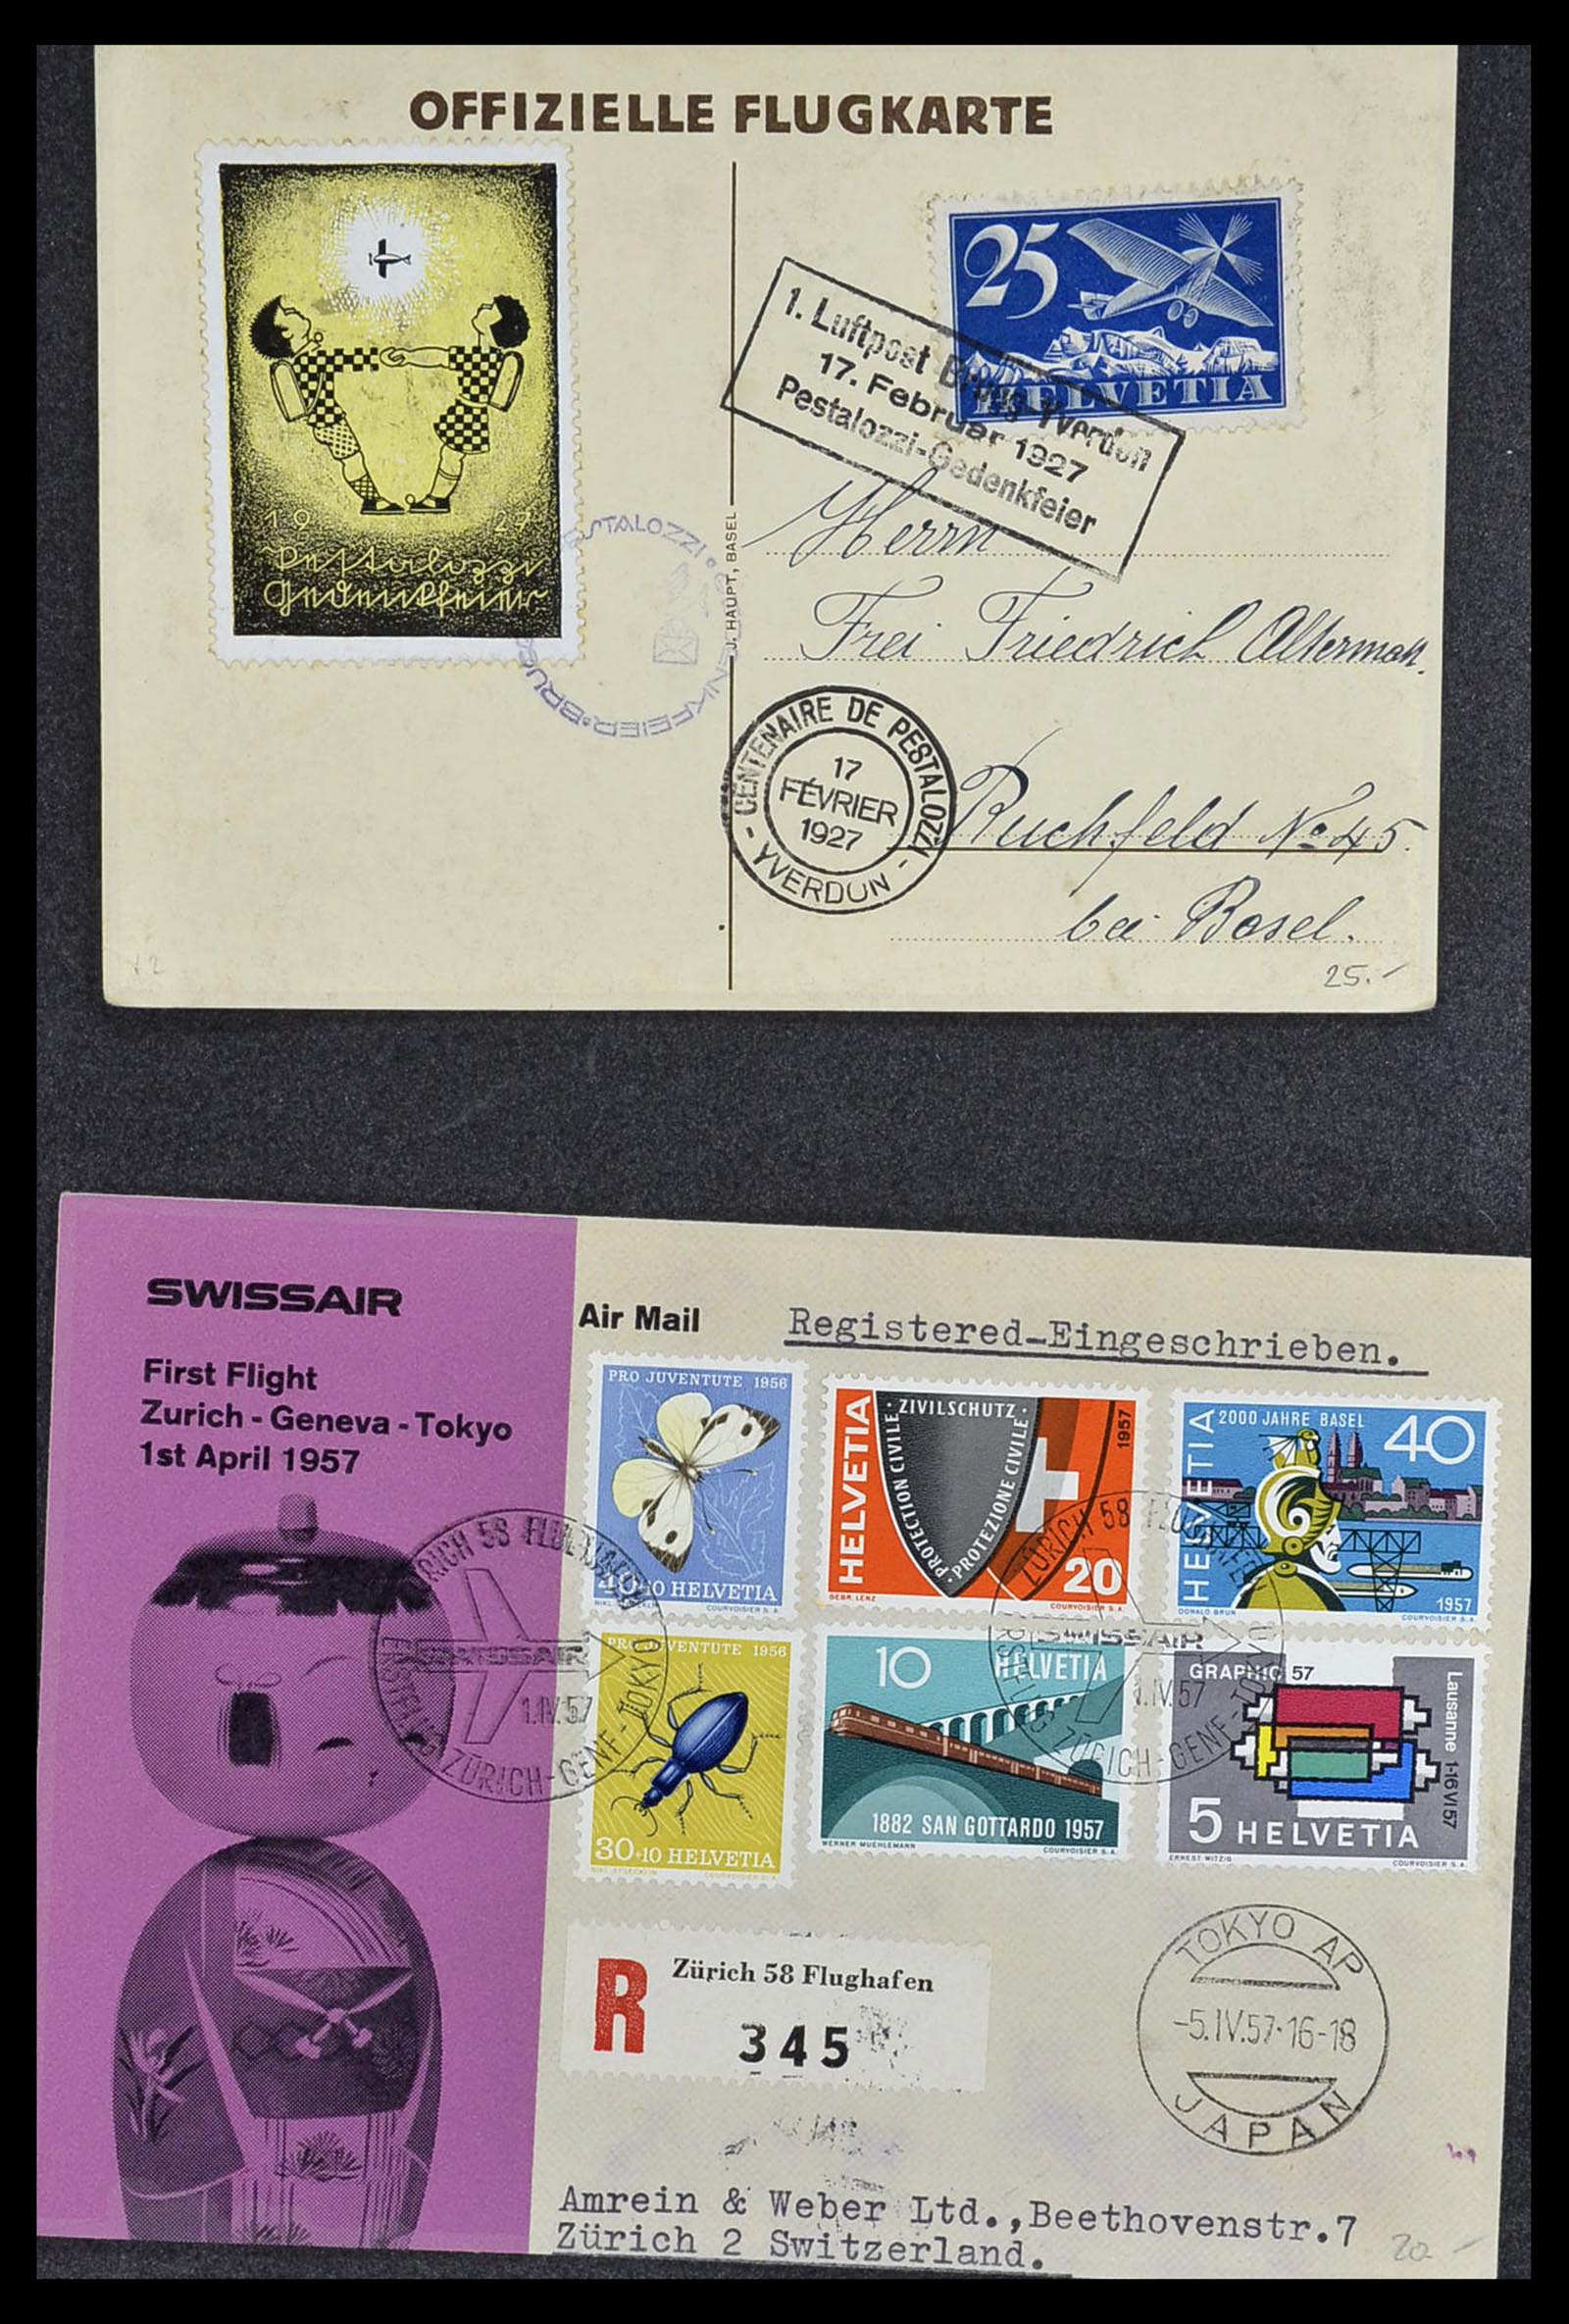 34141 073 - Stamp collection 34141 Switzerland airmail covers 1920-1960.